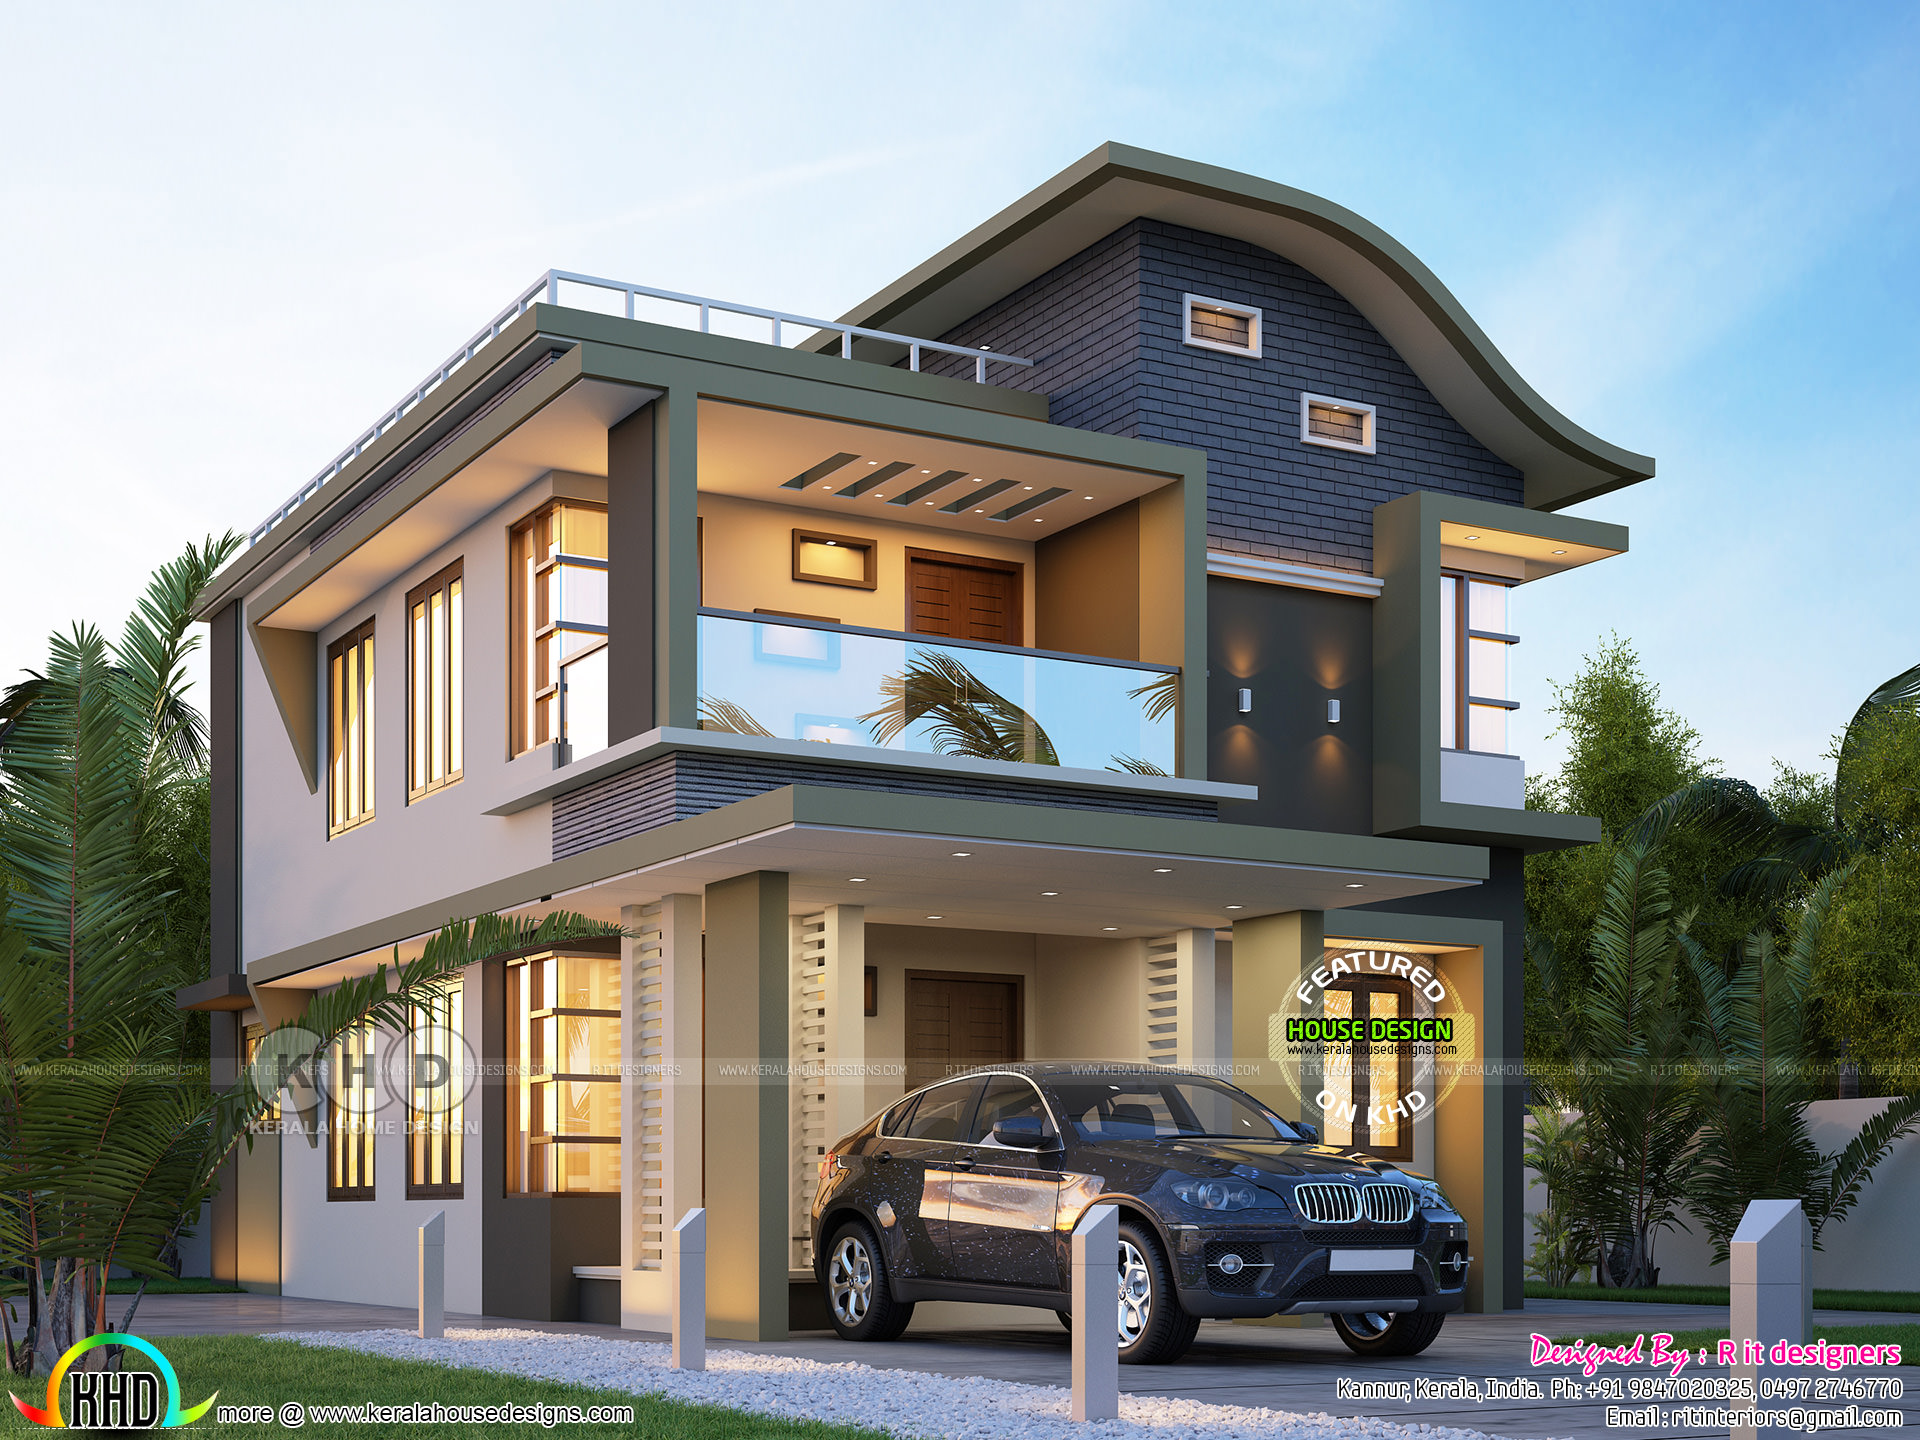   40 lakhs cost estimated contemporary  modern  house  